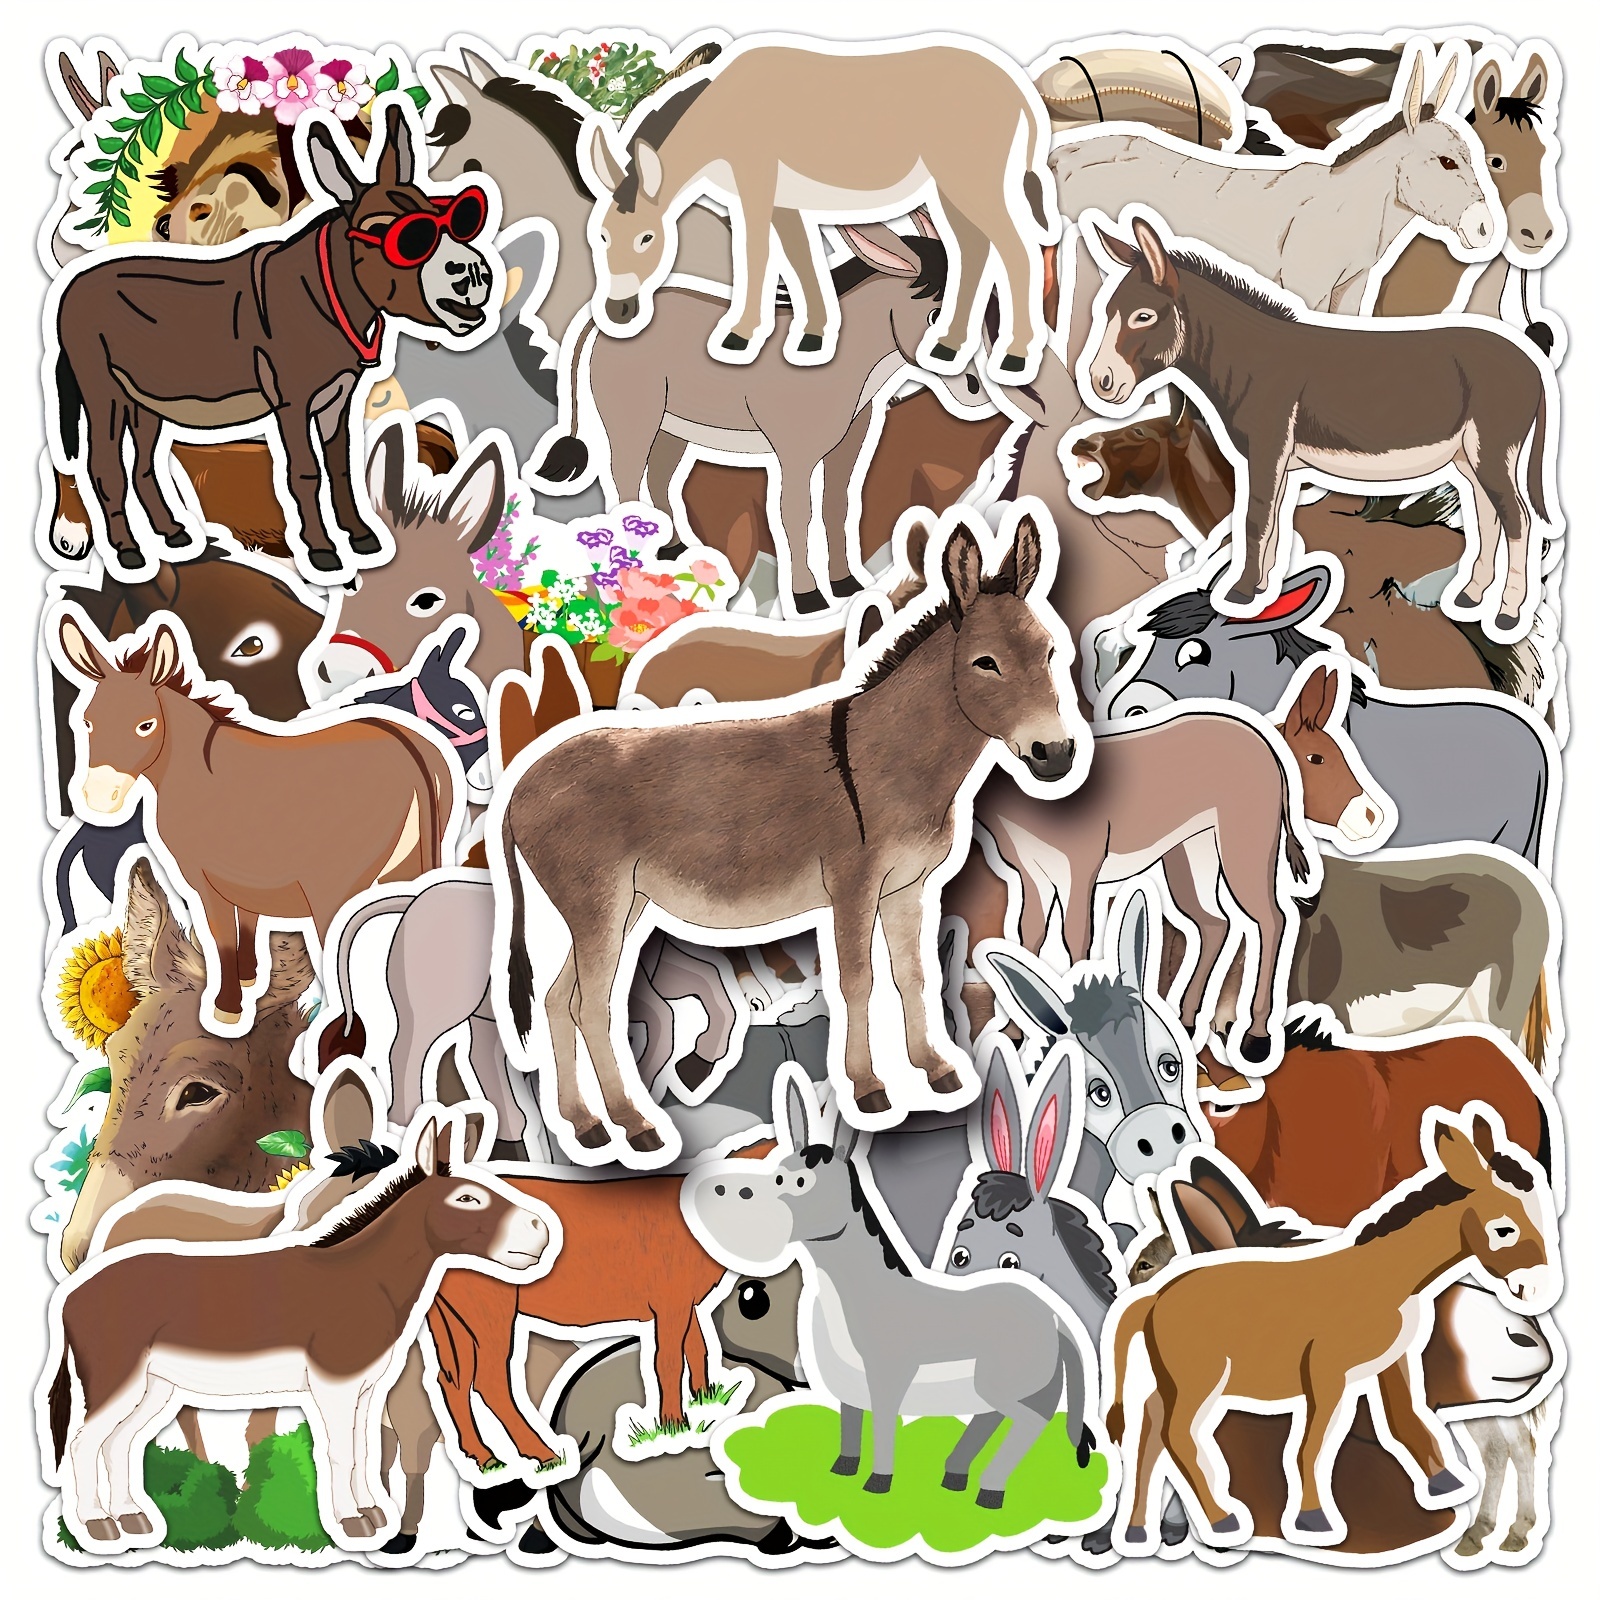 

50pcs Of Fun And Creative Donkey Animal Doodle Stickers - Perfect For Car, Bike, Luggage, And Cup Decoration!